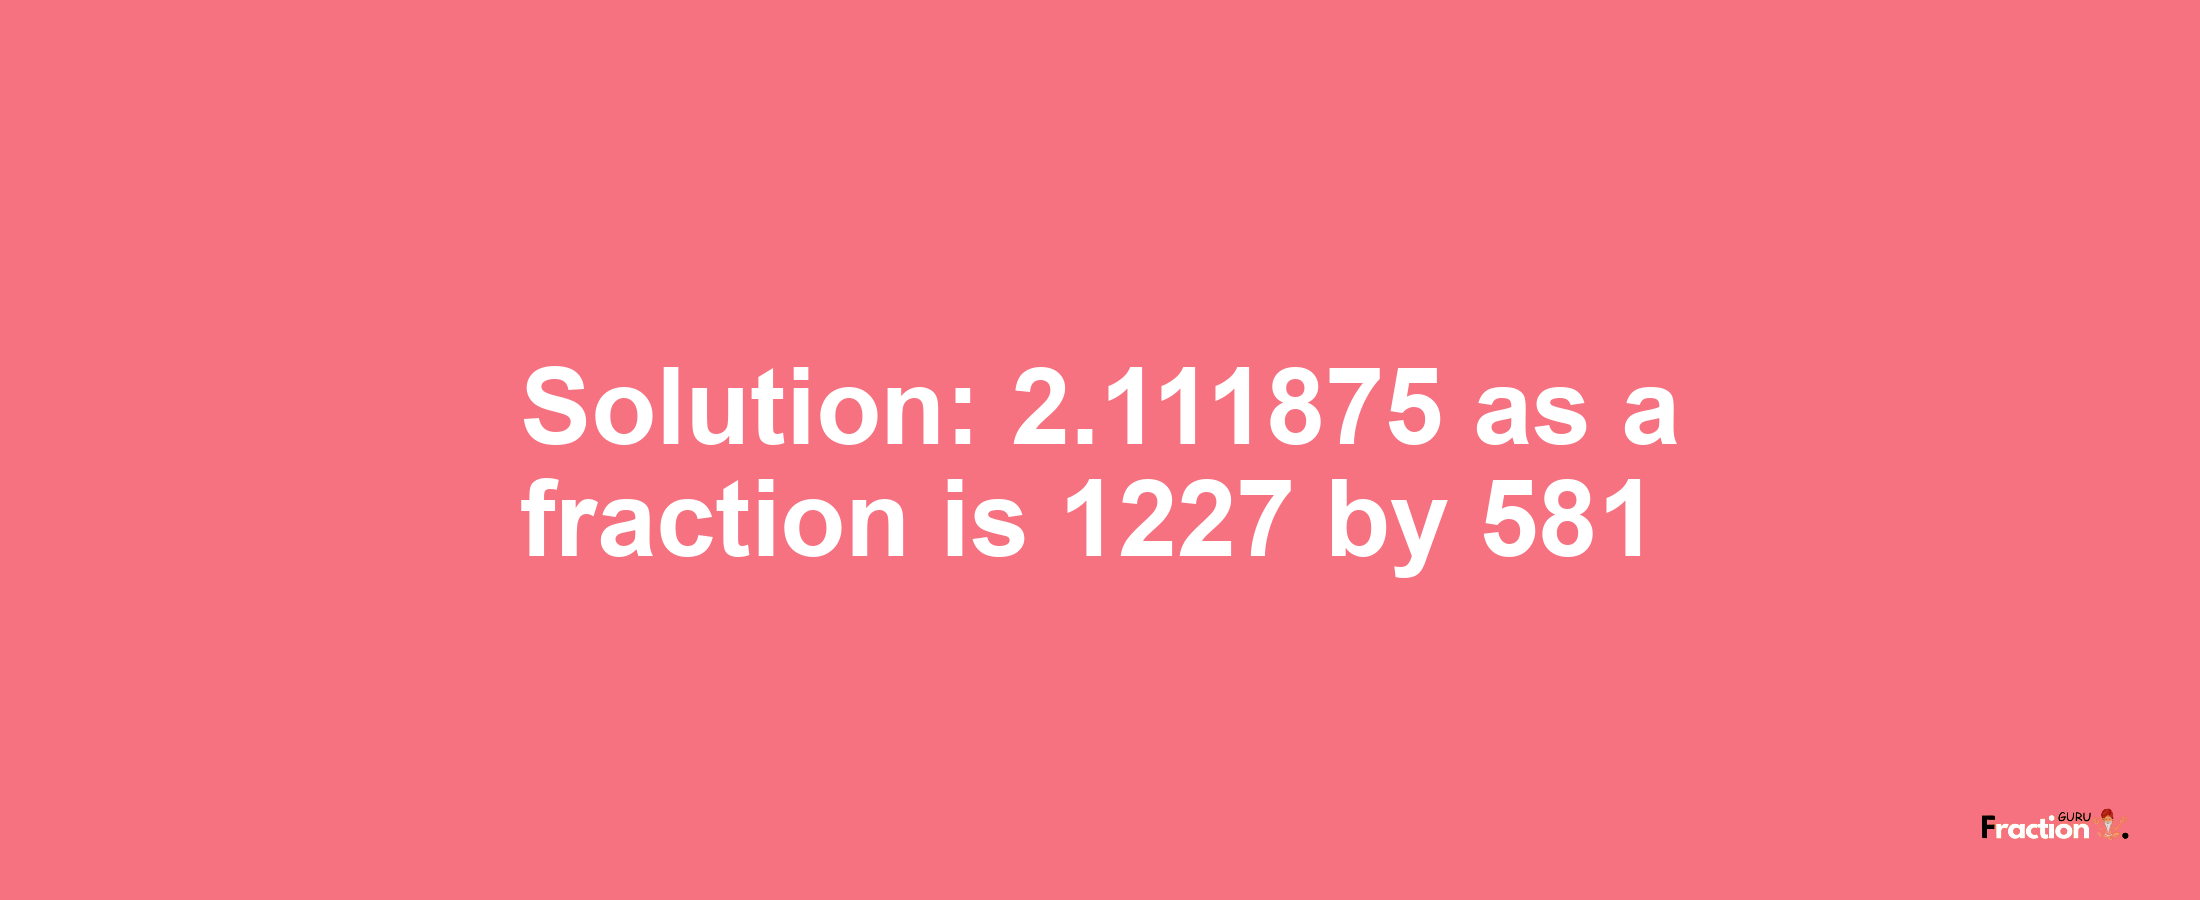 Solution:2.111875 as a fraction is 1227/581